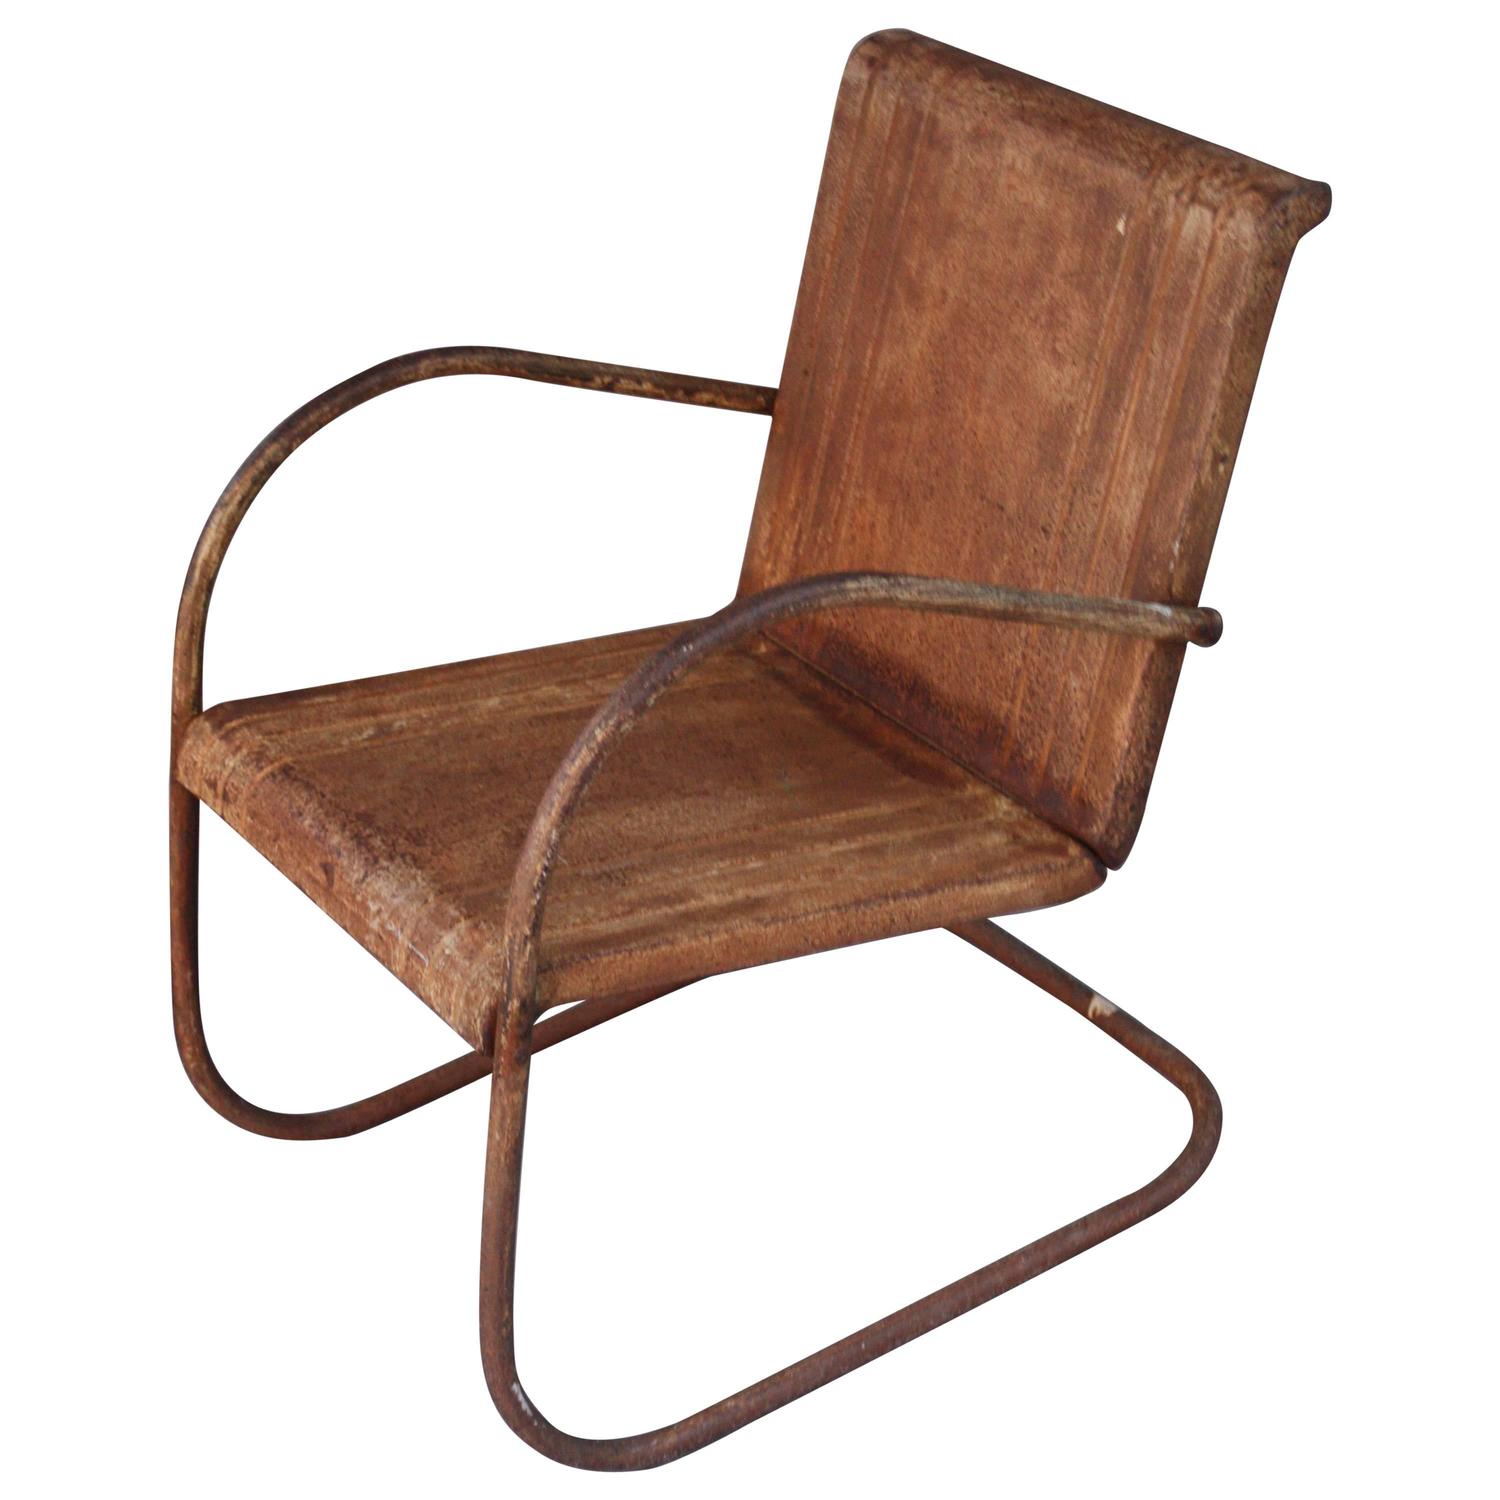 Antique Industrial Style Classic Metal Patio Chair at 1stdibs